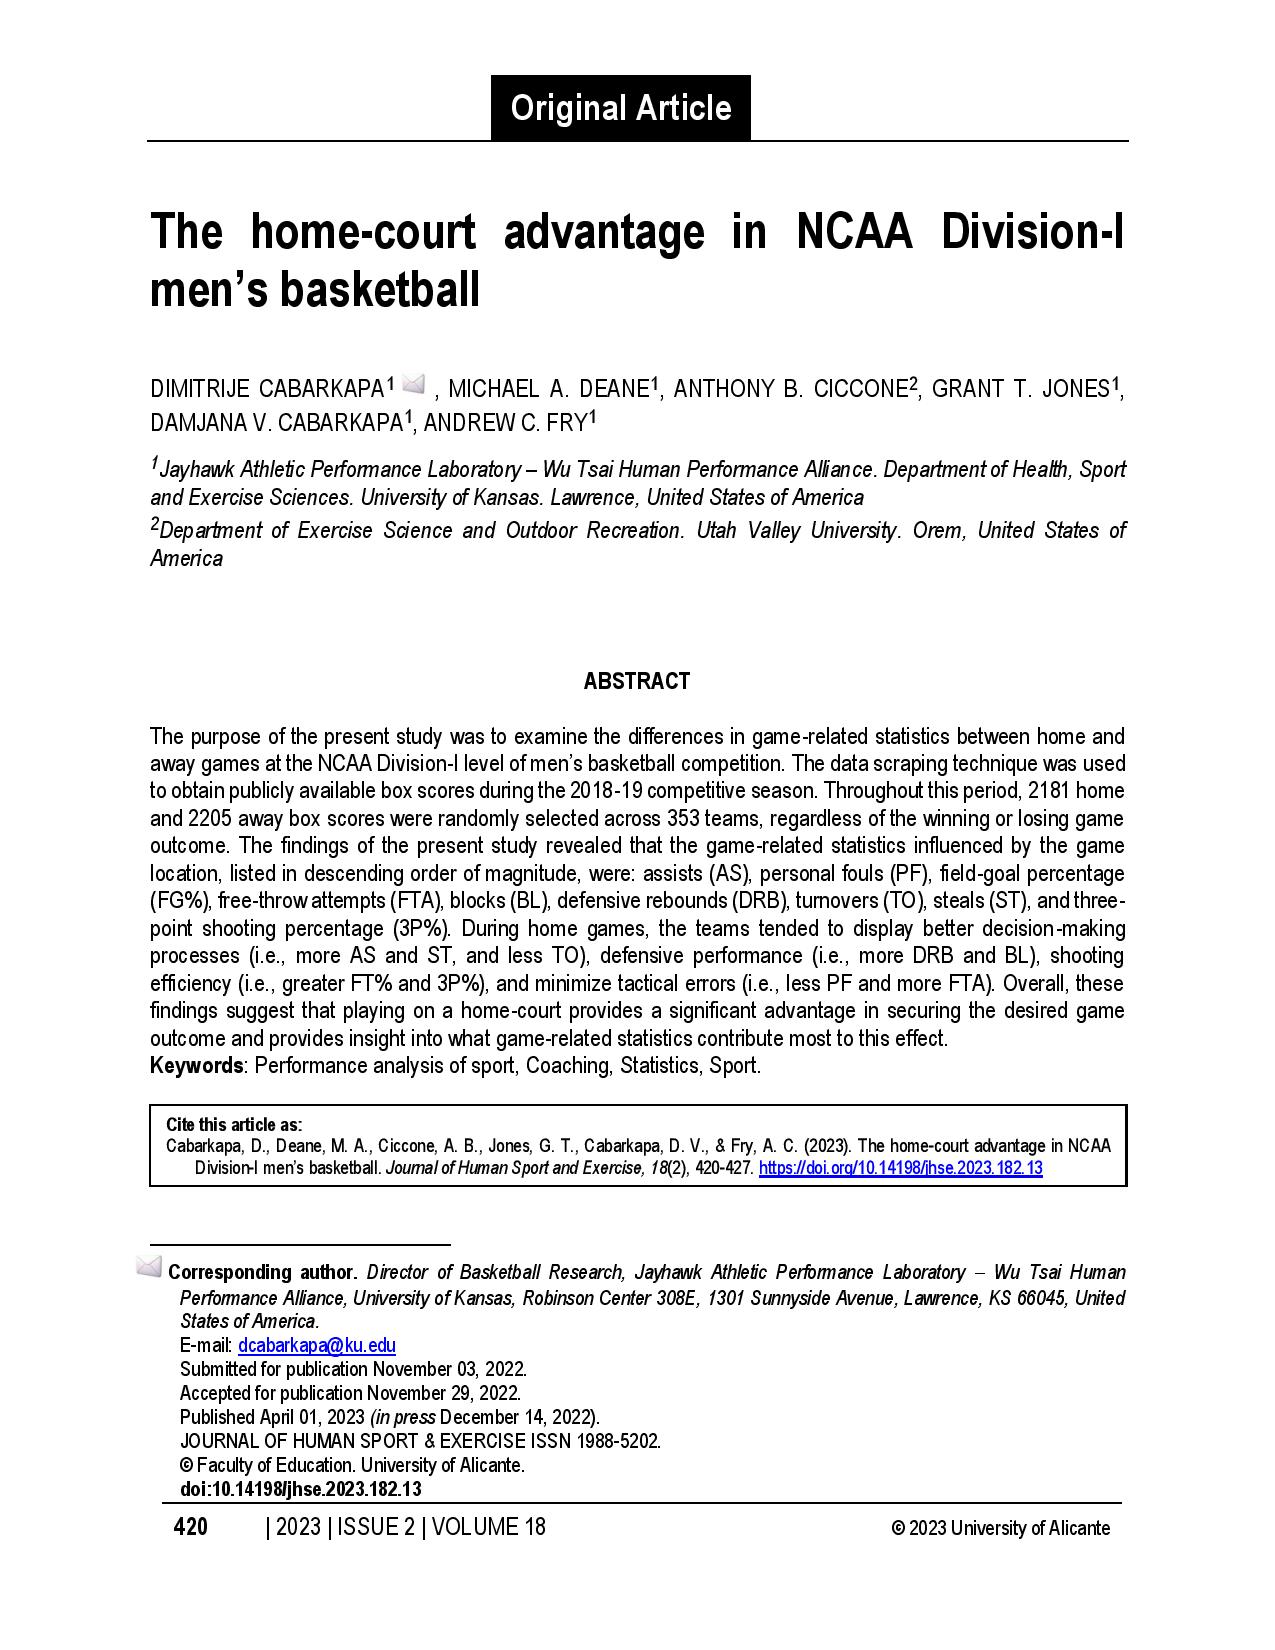 The home-court advantage in NCAA Division-I men’s basketball